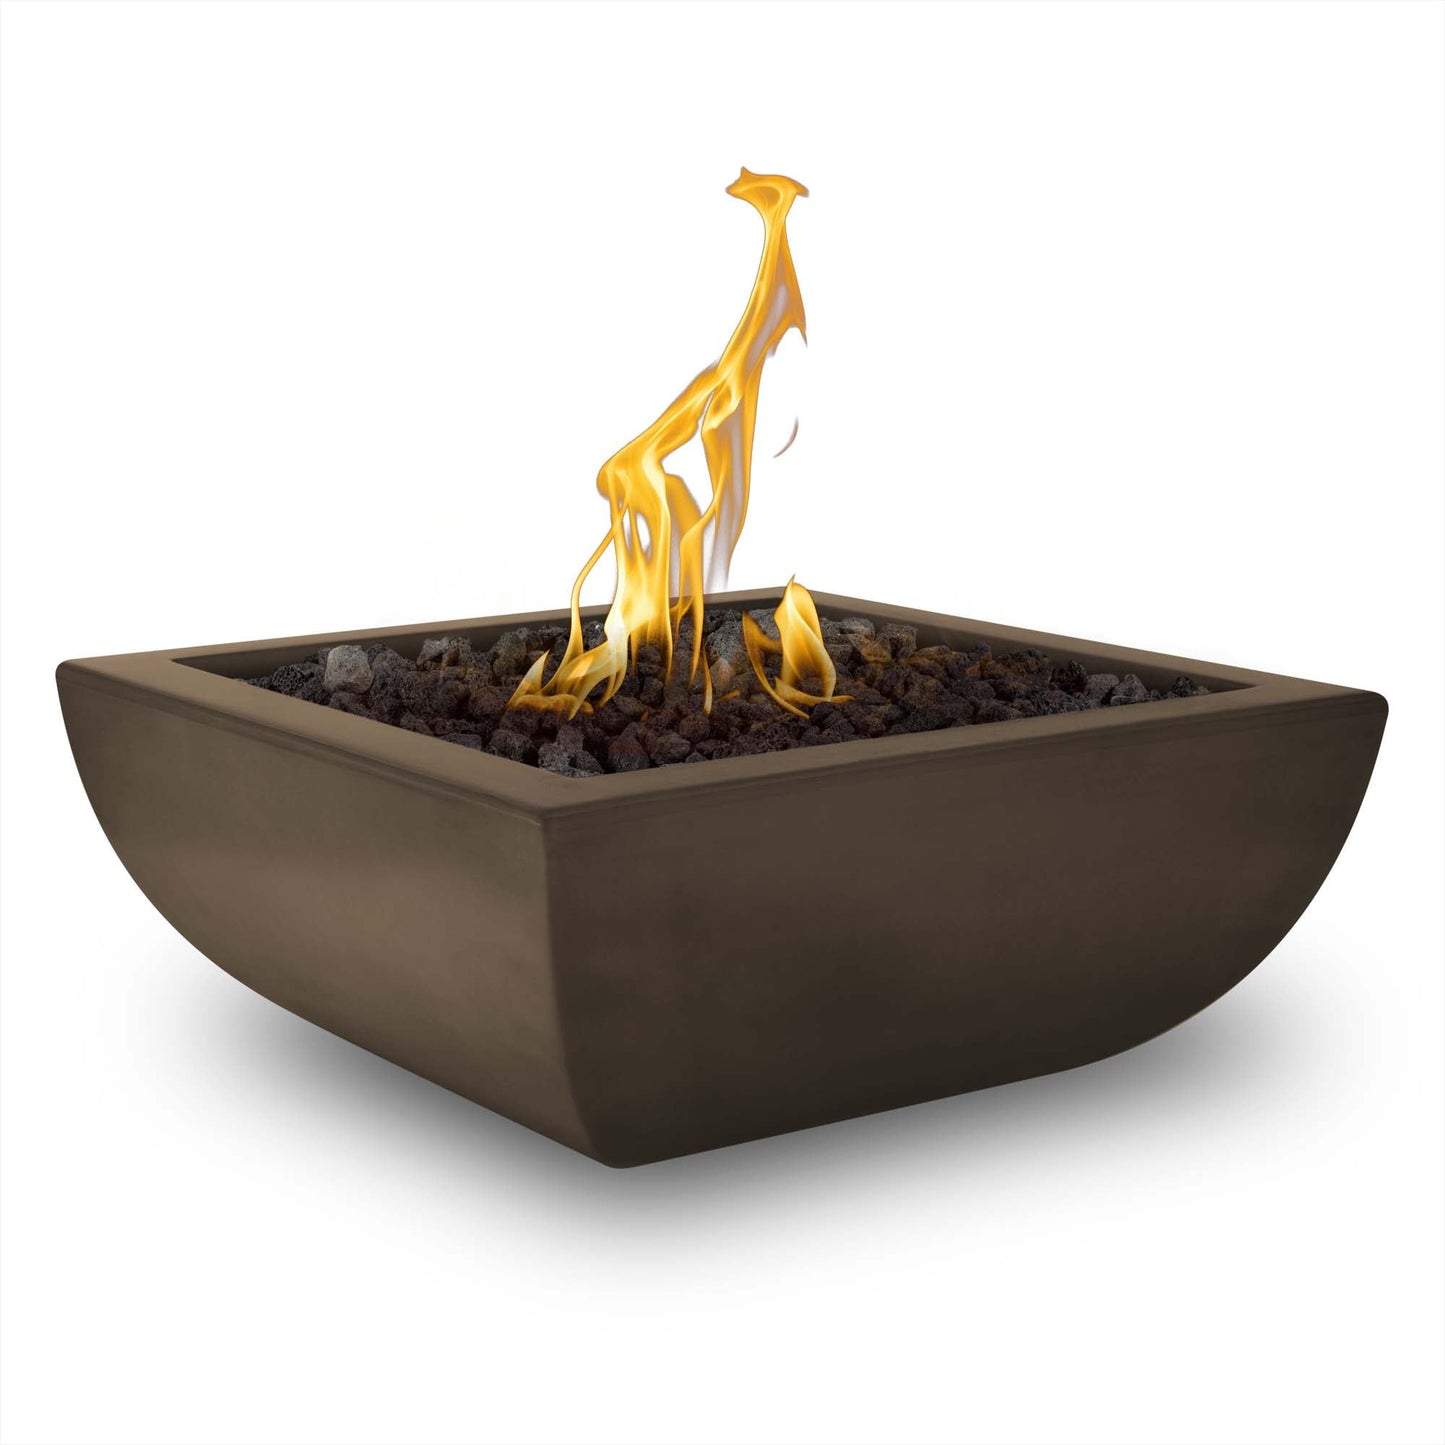 The Outdoor Plus Square Avalon 36" Rustic White GFRC Concrete Liquid Propane Fire Bowl with Match Lit with Flame Sense Ignition